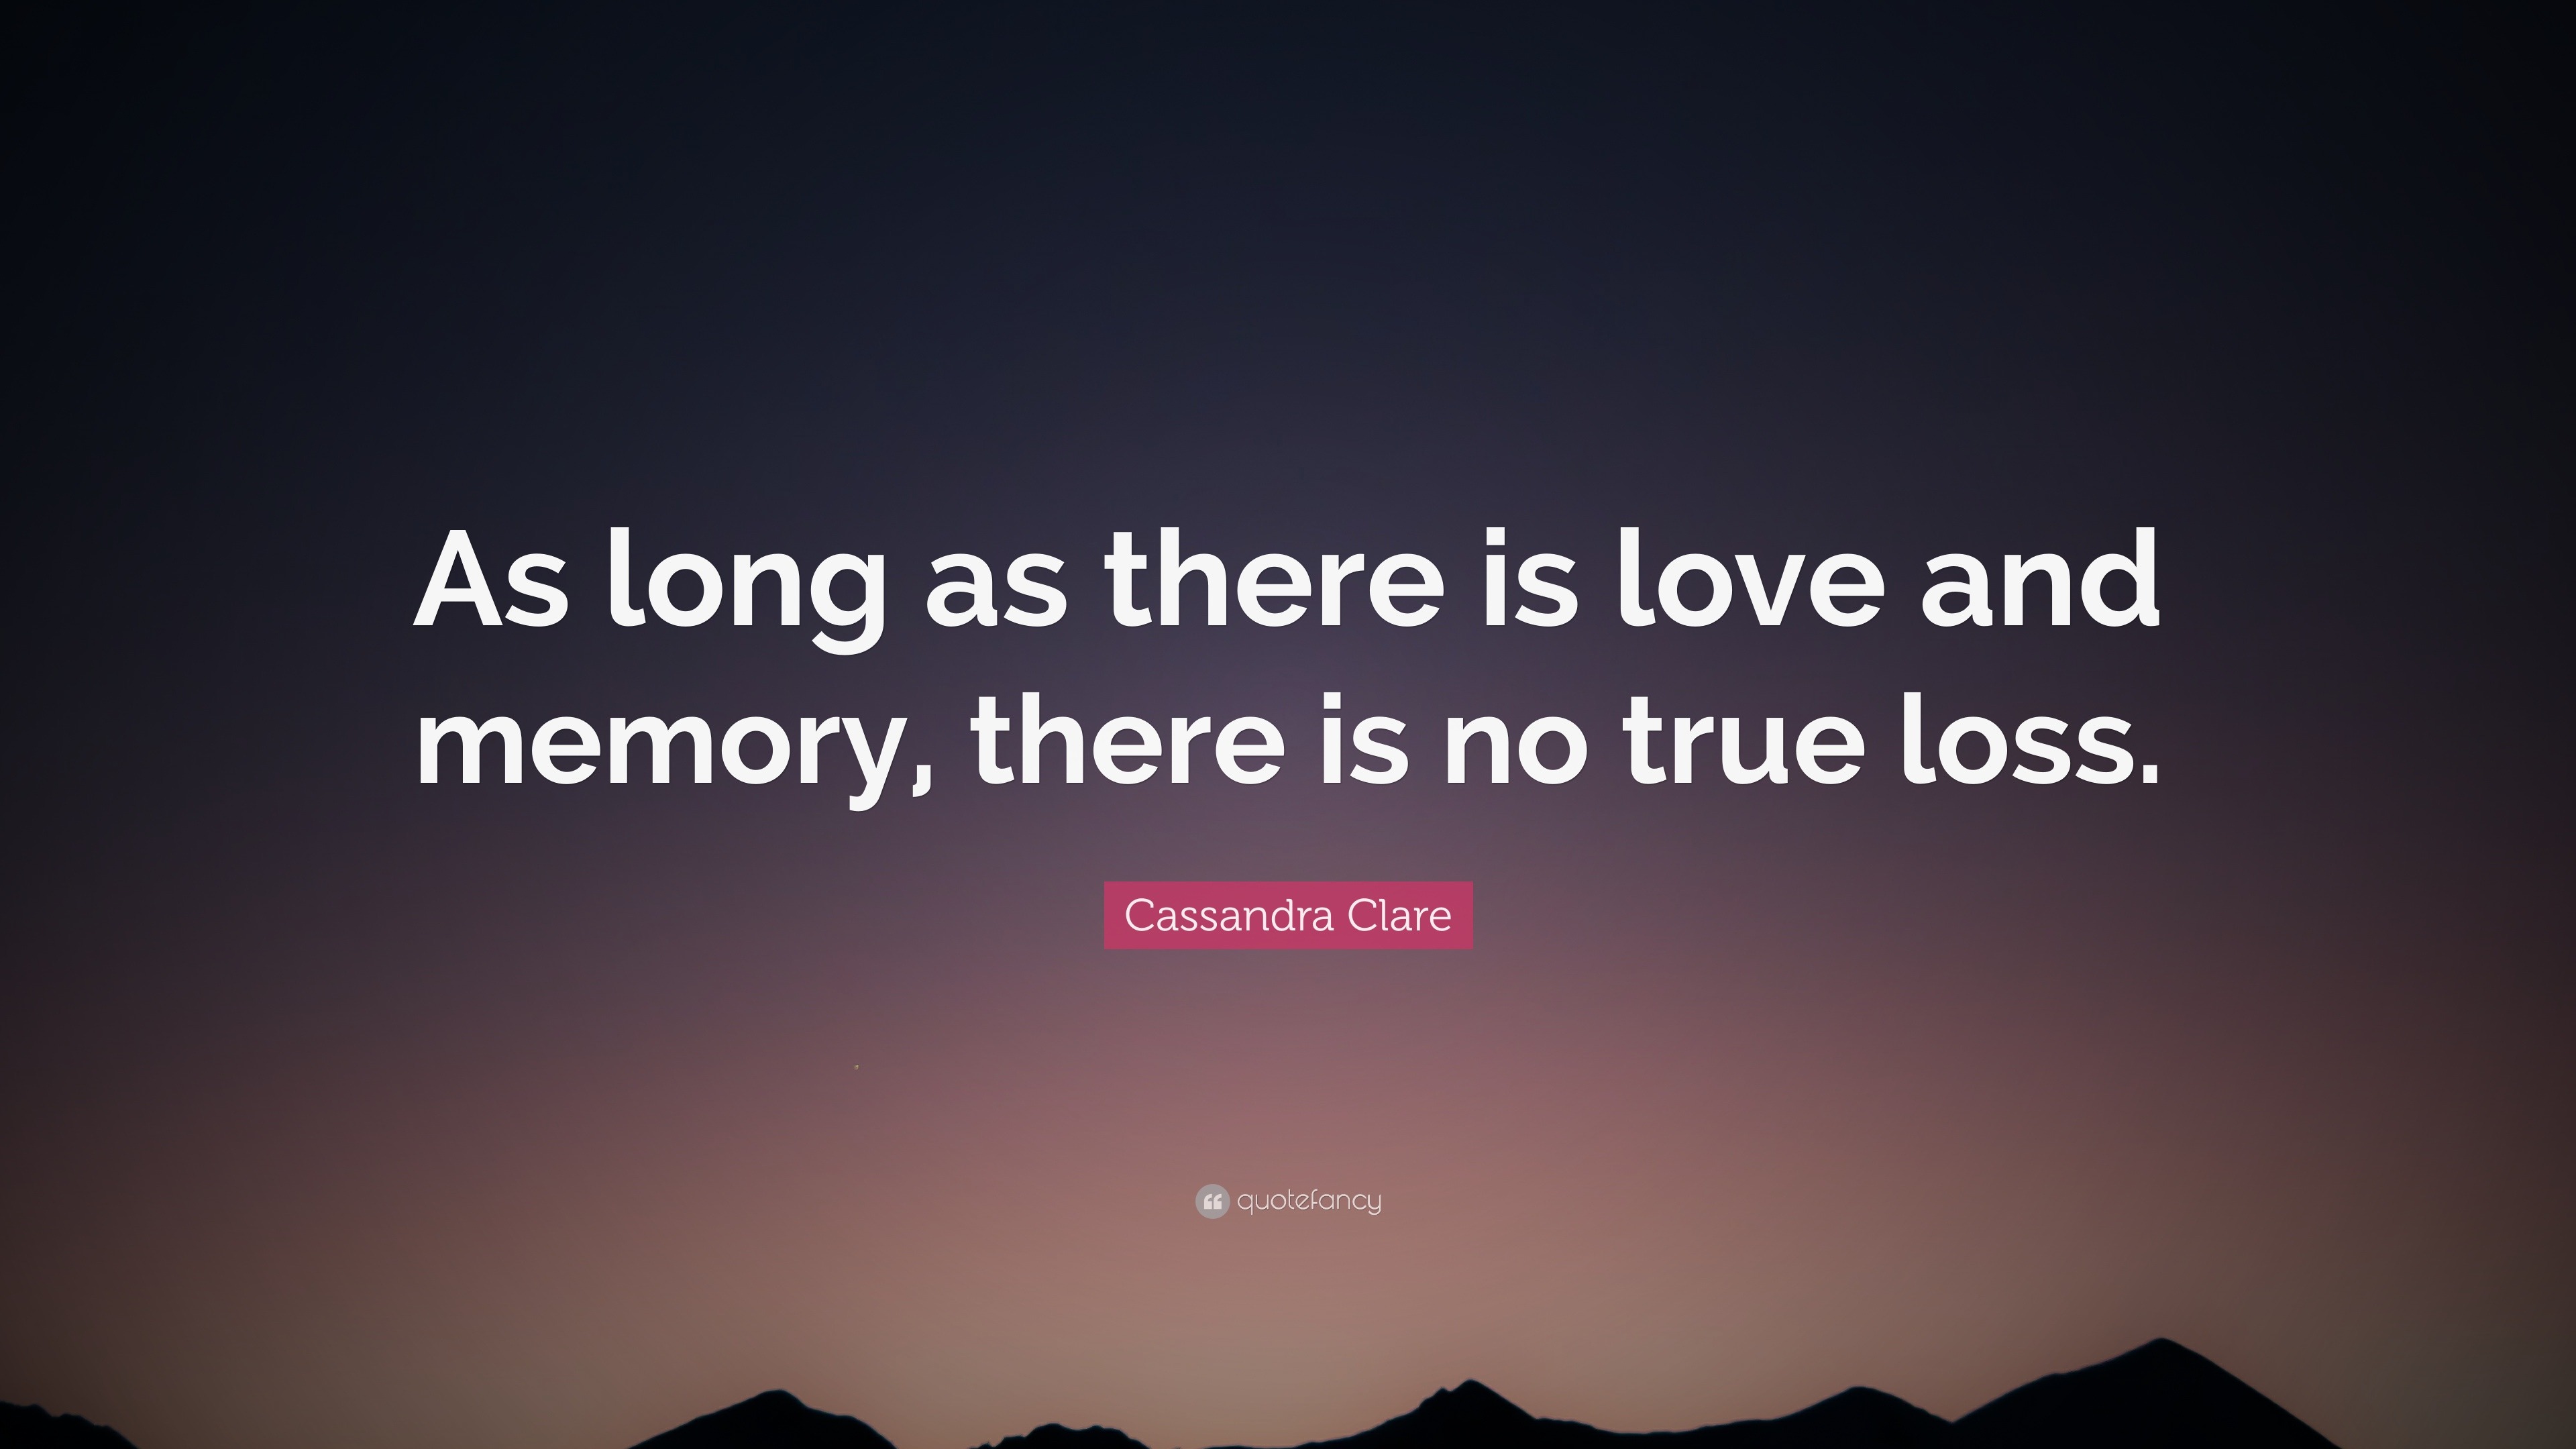 Cassandra Clare Quote “As long as there is love and memory there is